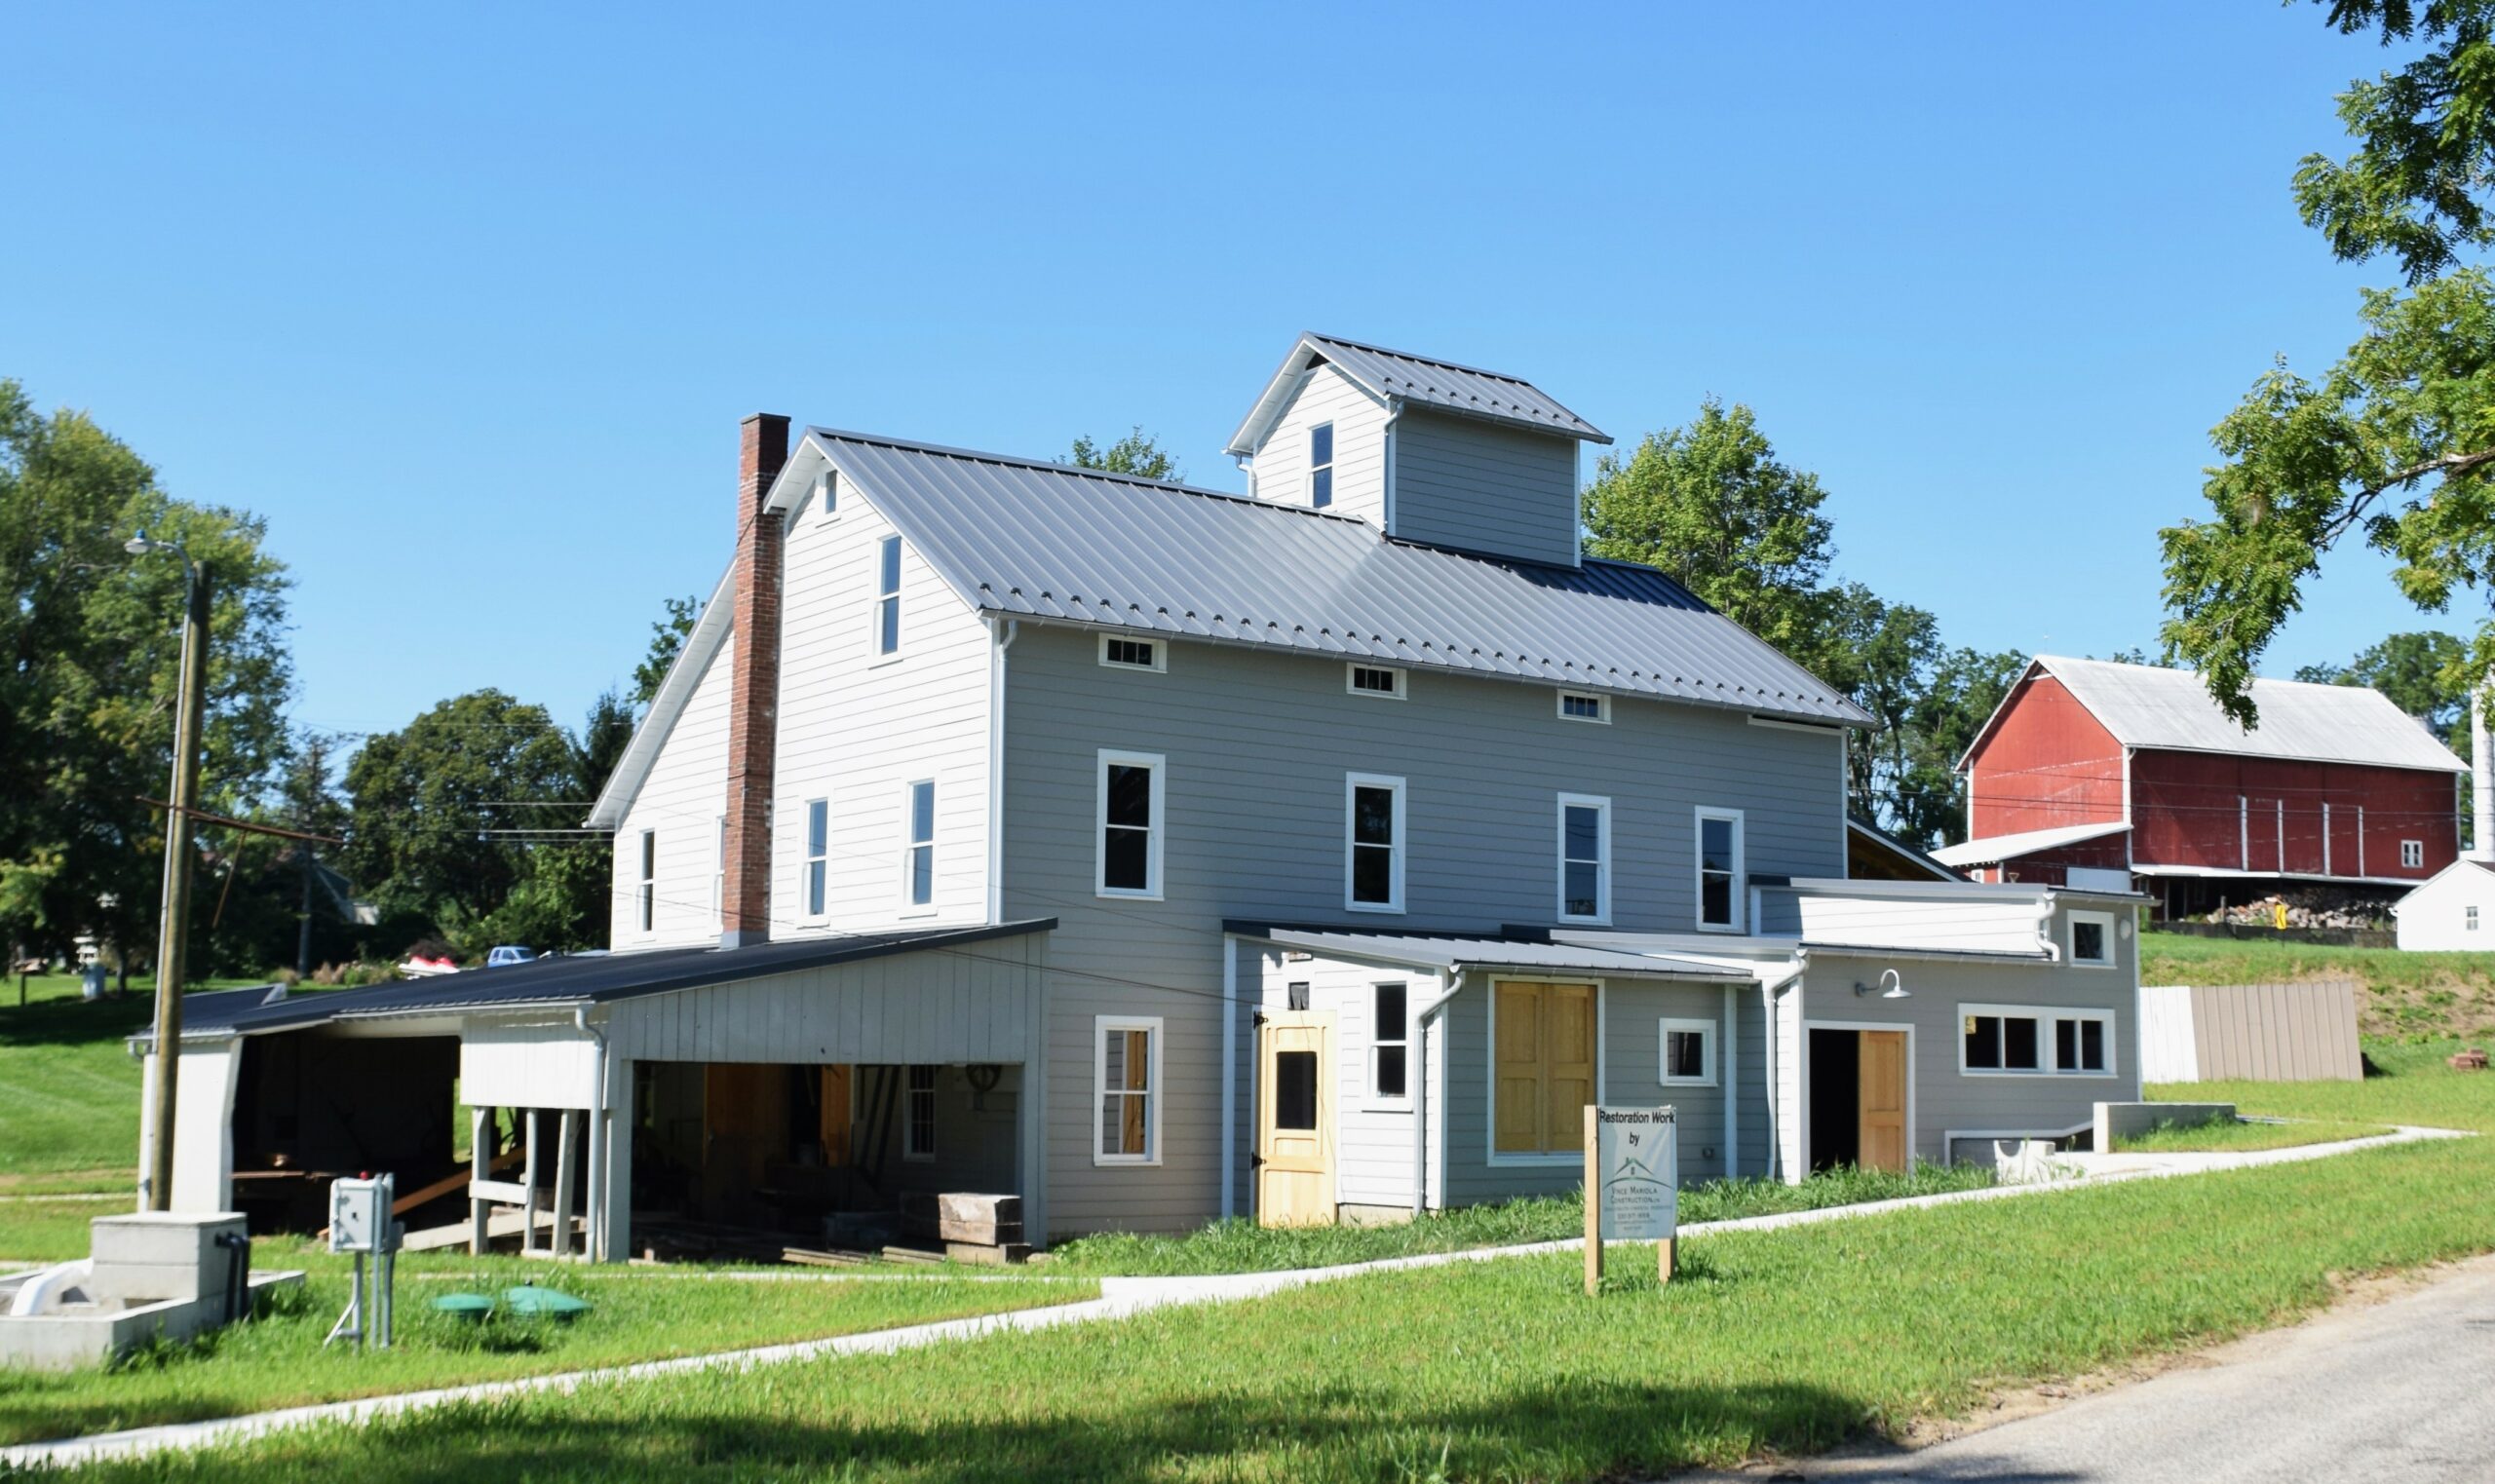 After many years of hard work and partnership, Kister Mill has been completely restored.